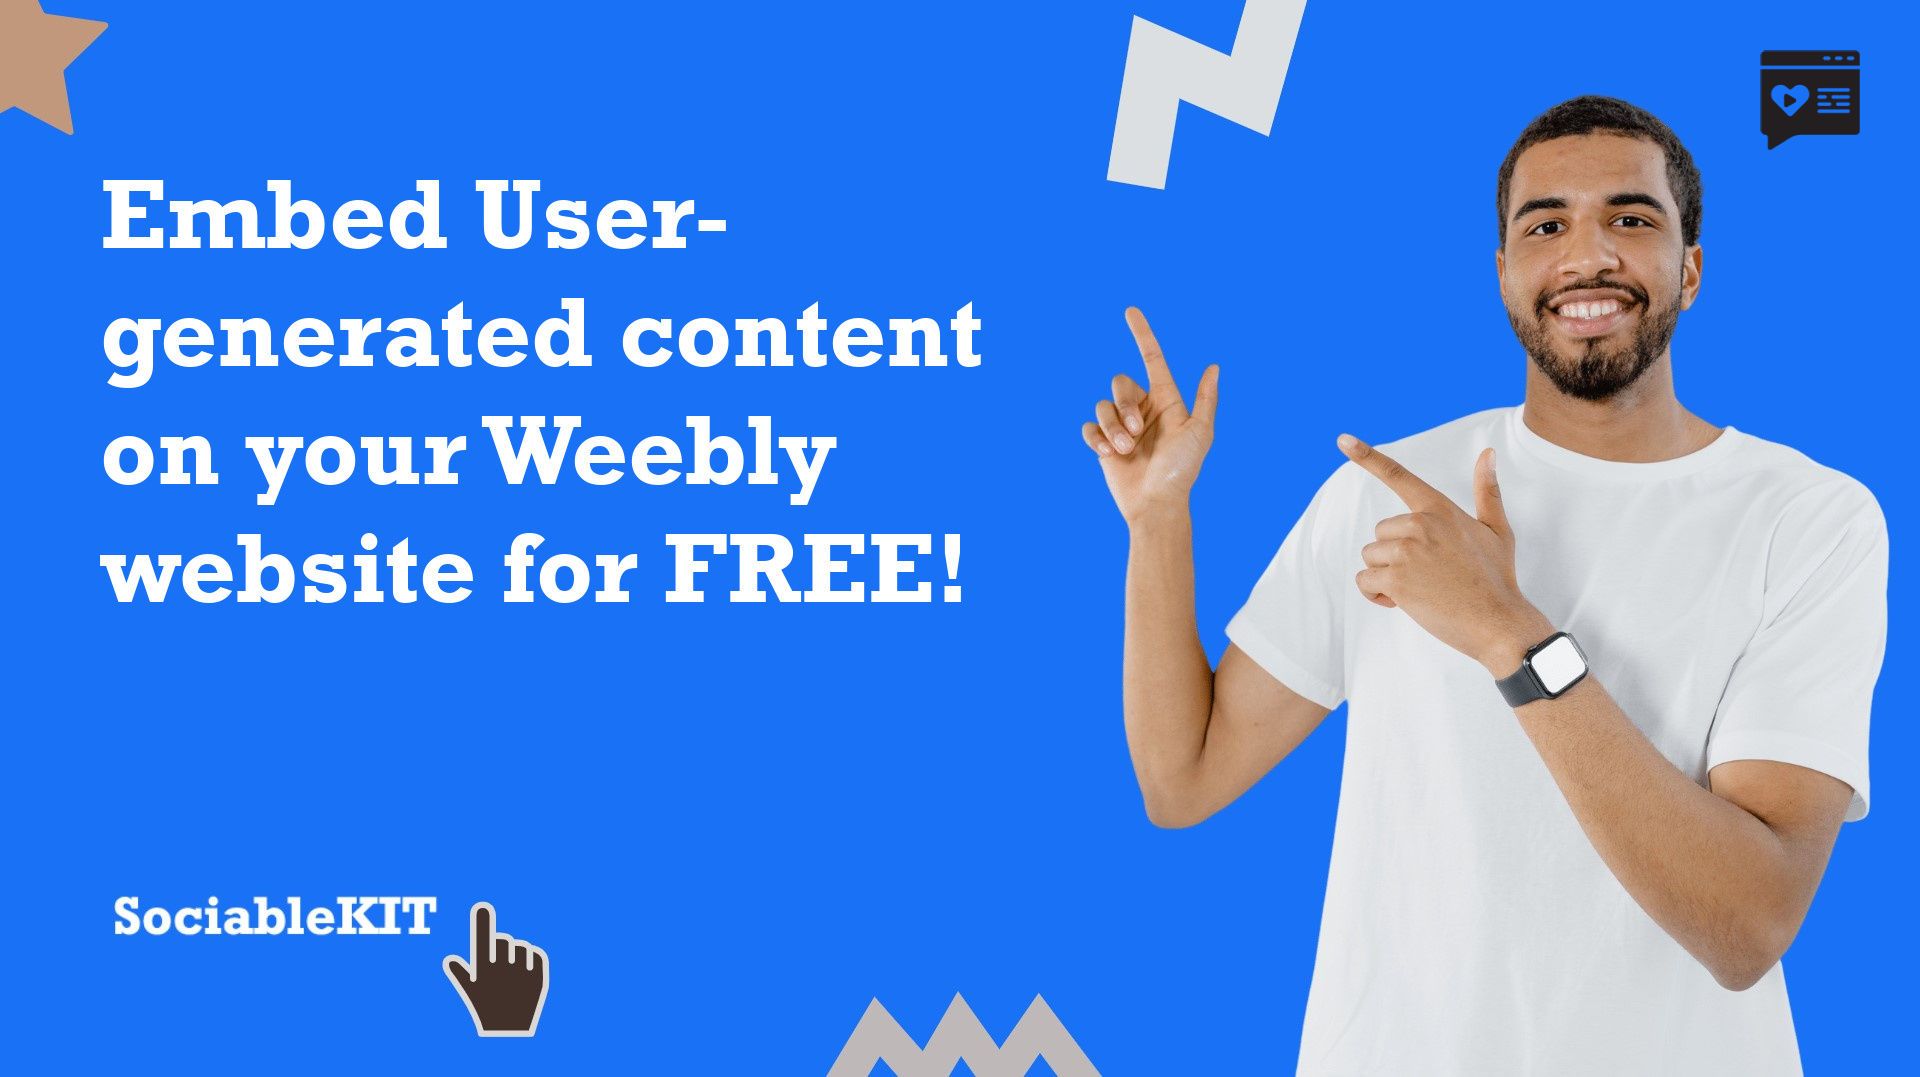 How to embed User-generated content on your Weebly website for FREE?